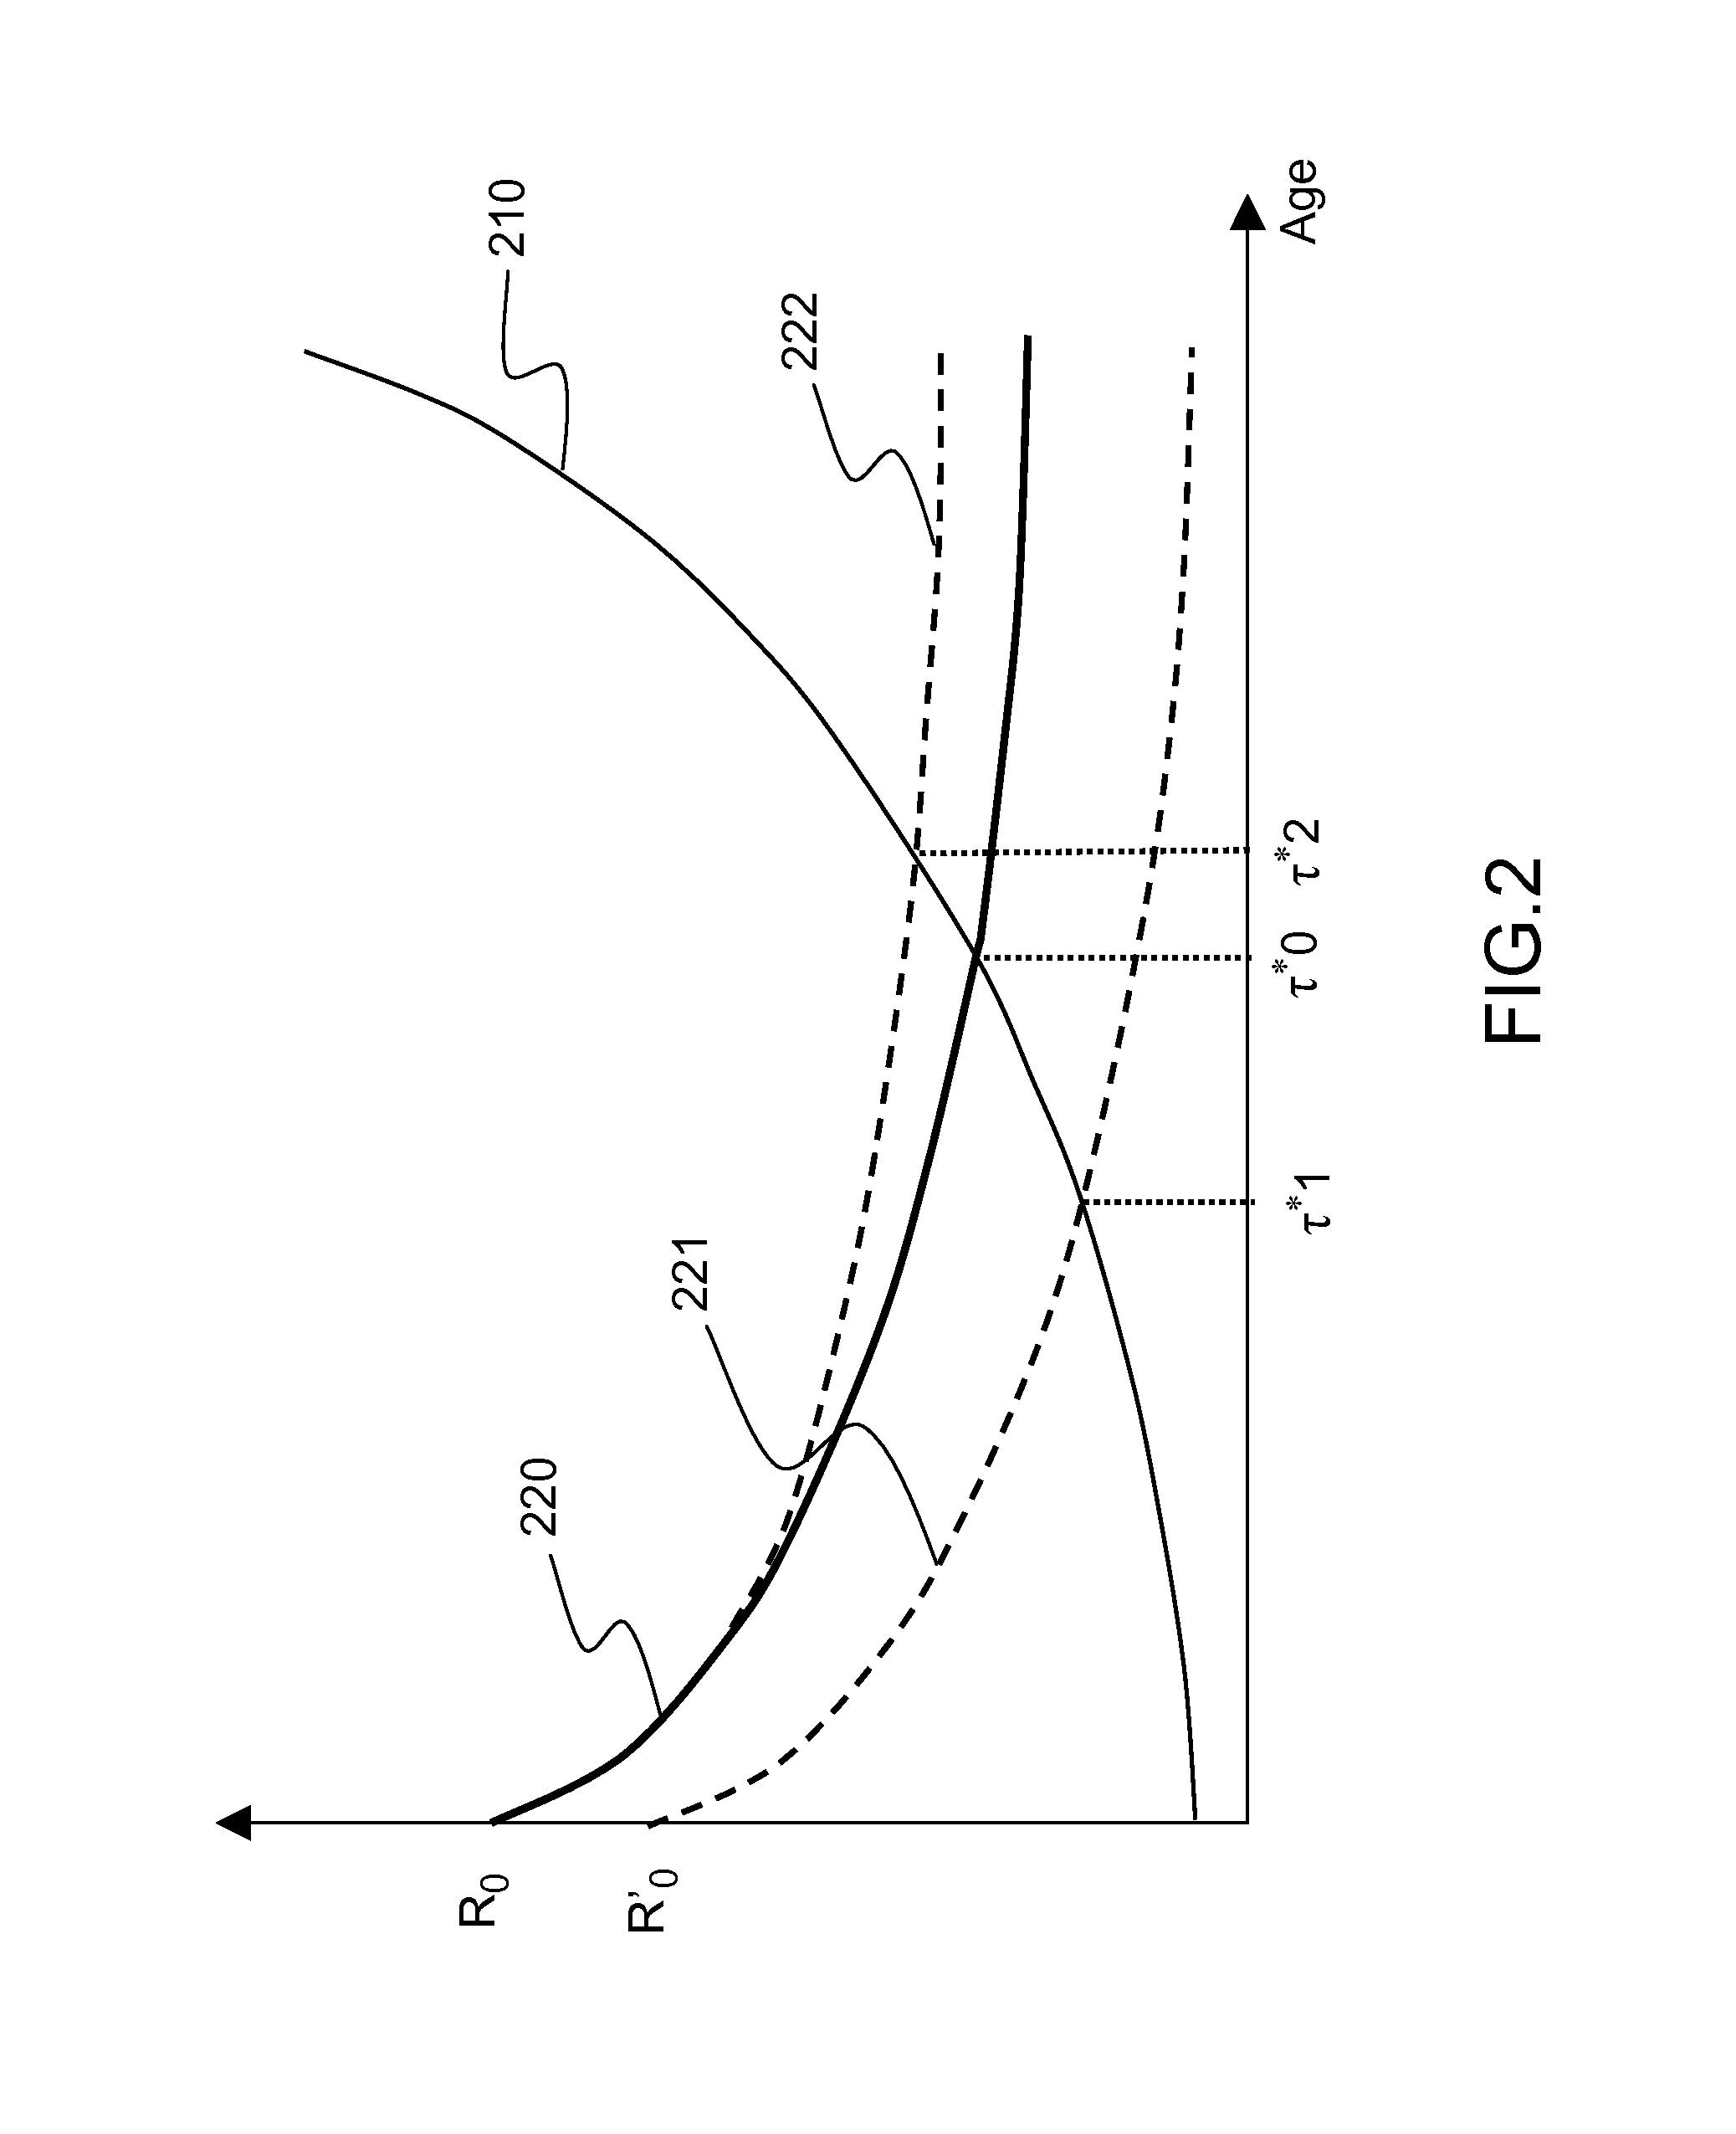 Computer system for scoring patents